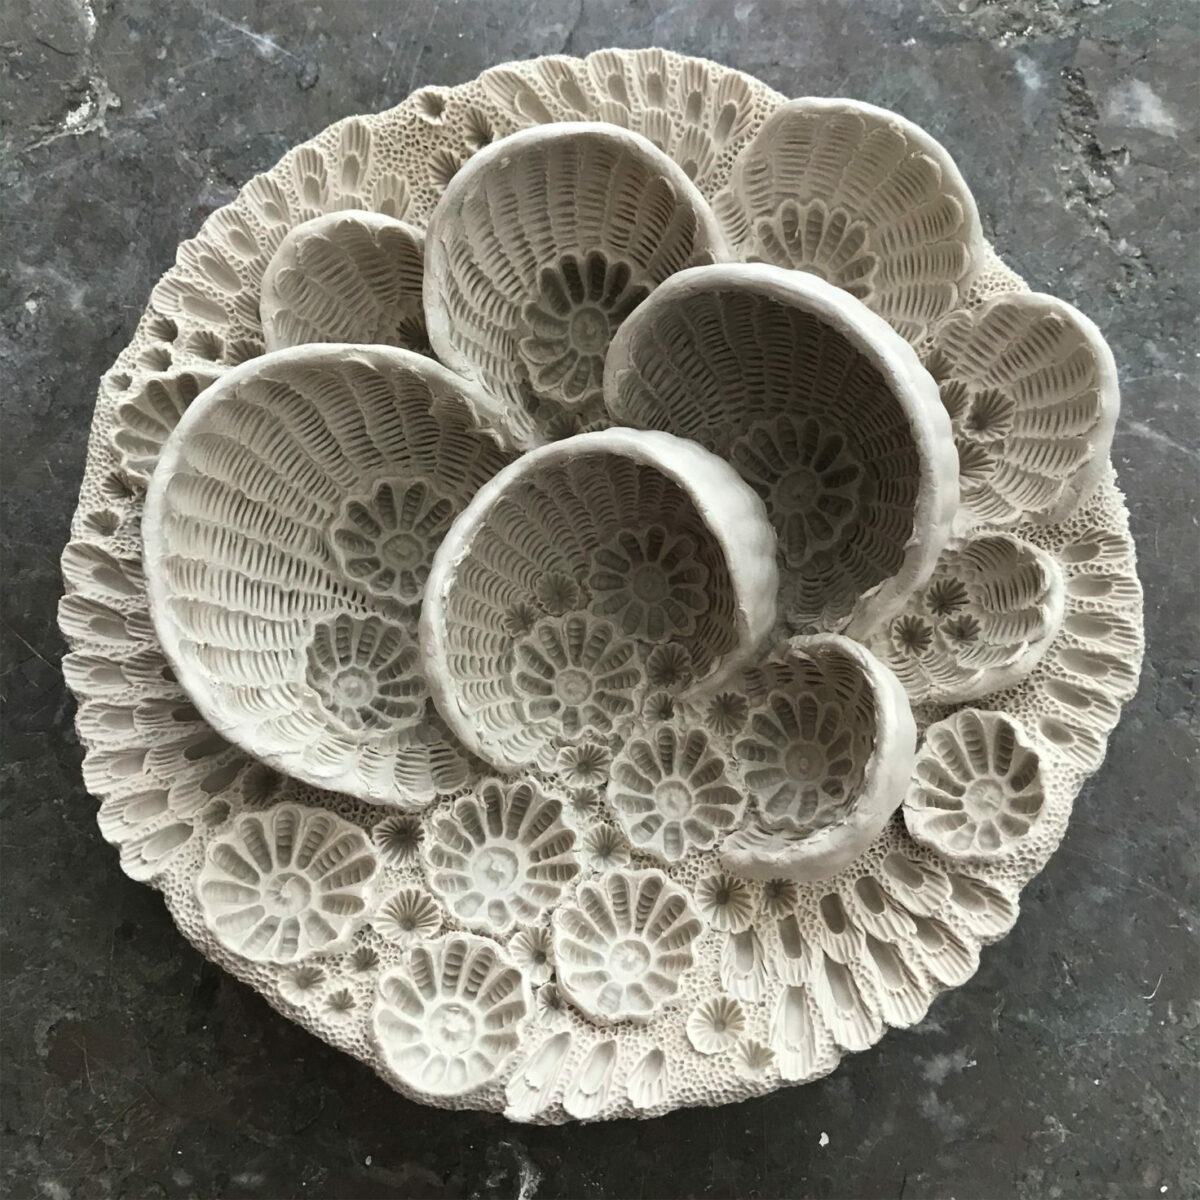 Intricate Abstract Porcelain Sculptures By Lisa Seaurchin 28